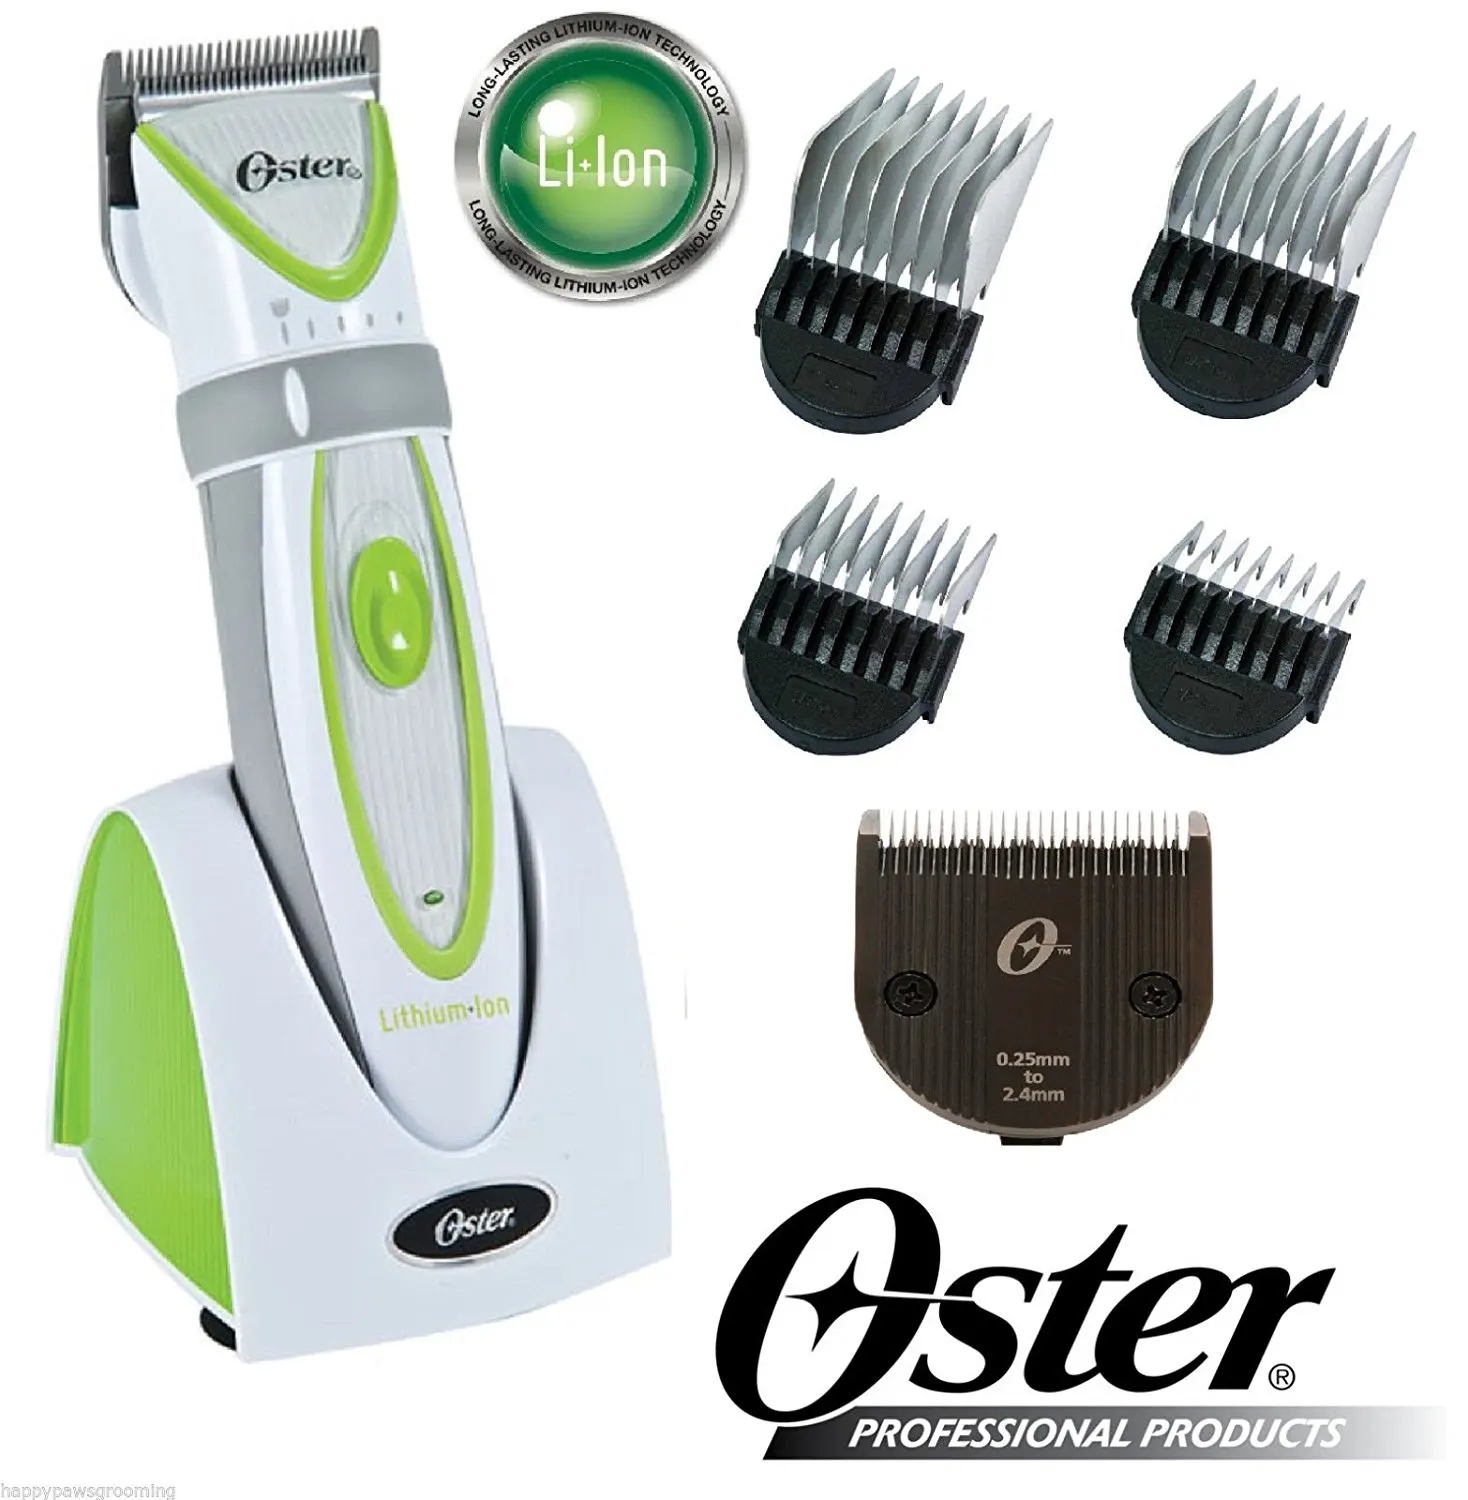 oster volt dog clippers